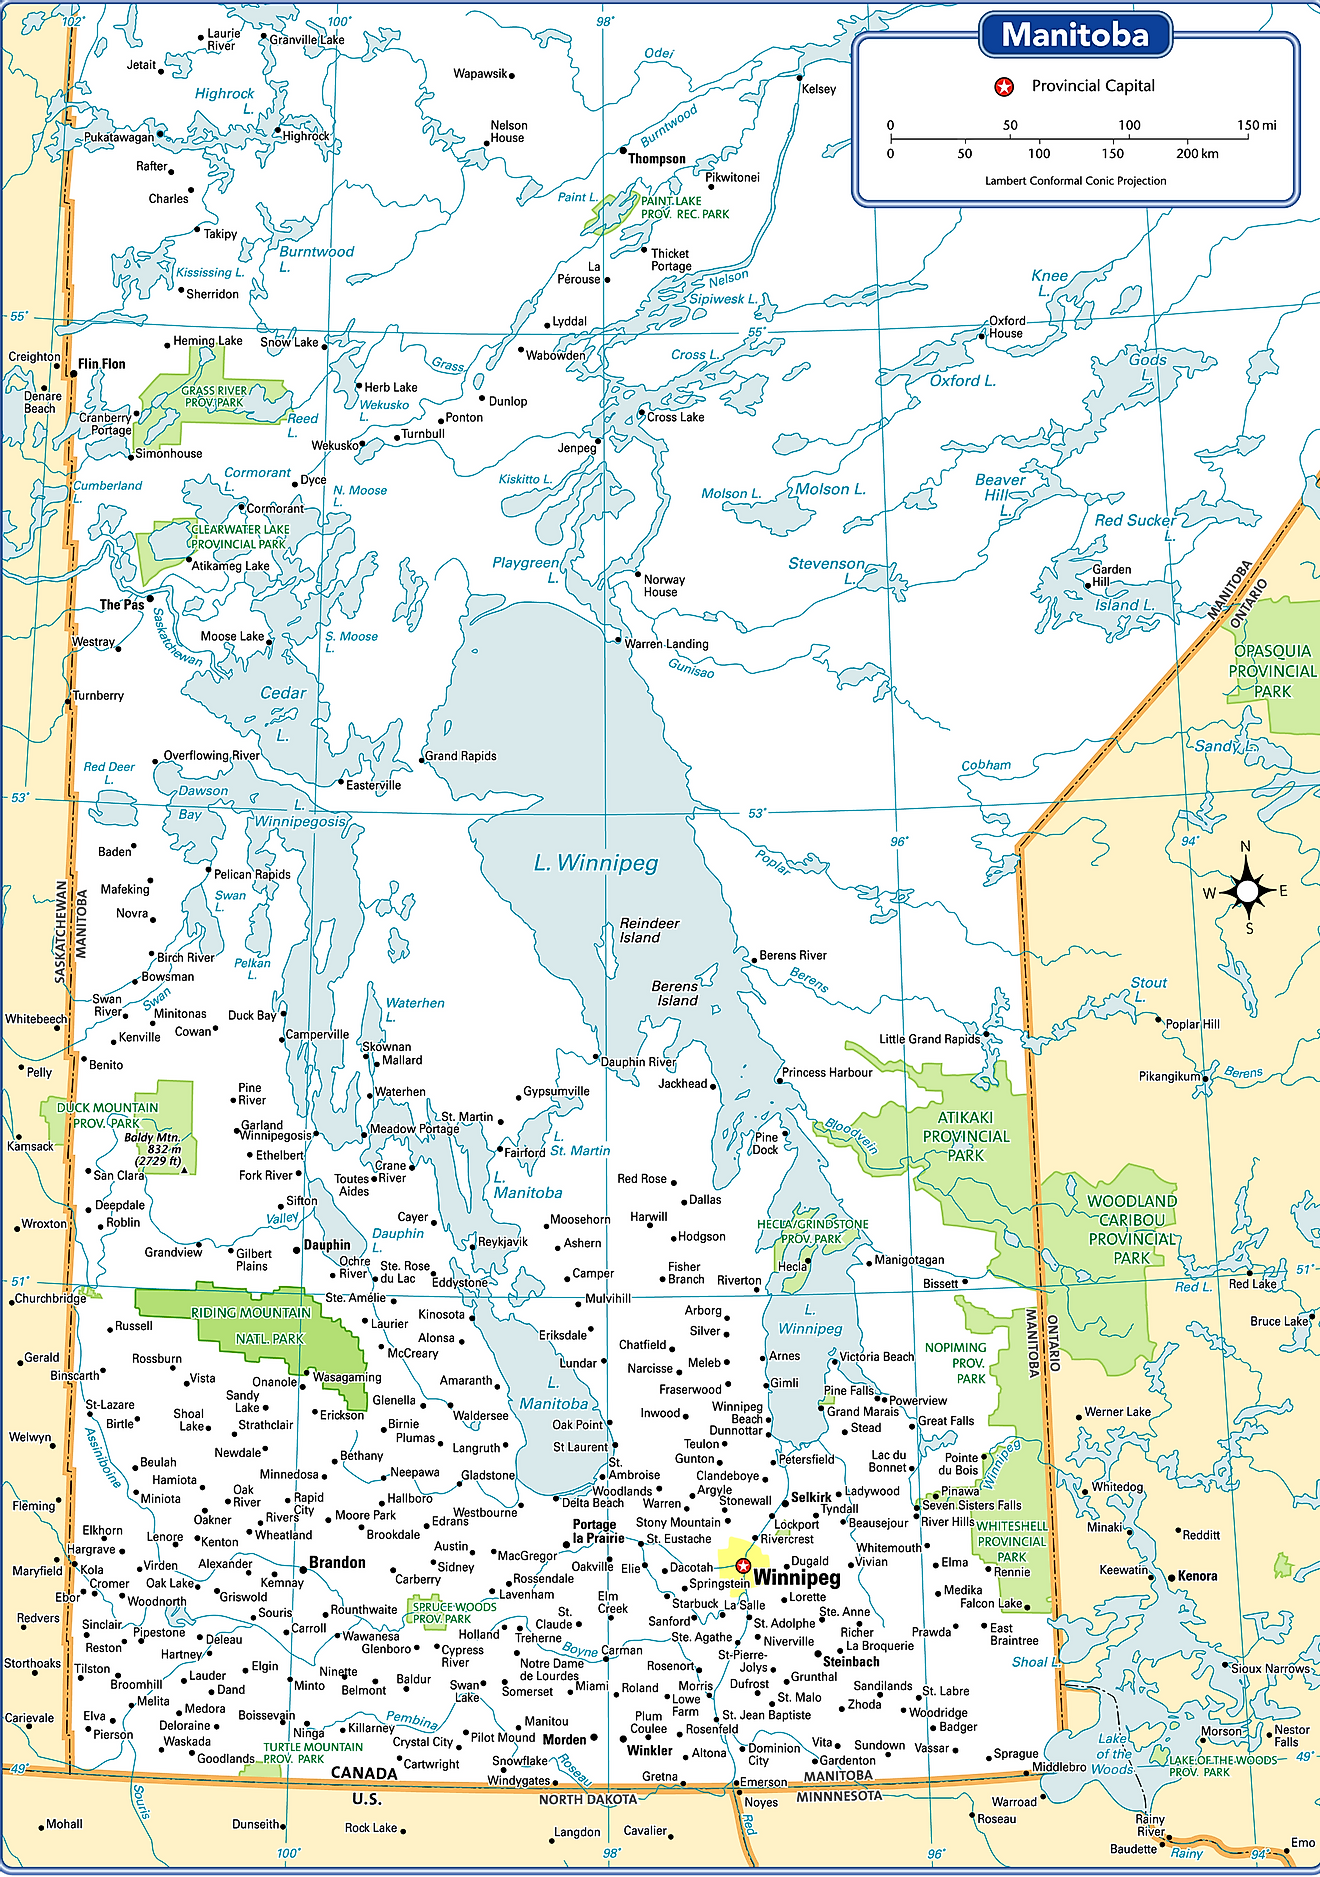 Administrative Map of Manitoba showing its cities/towns including its capital city - Winnipeg